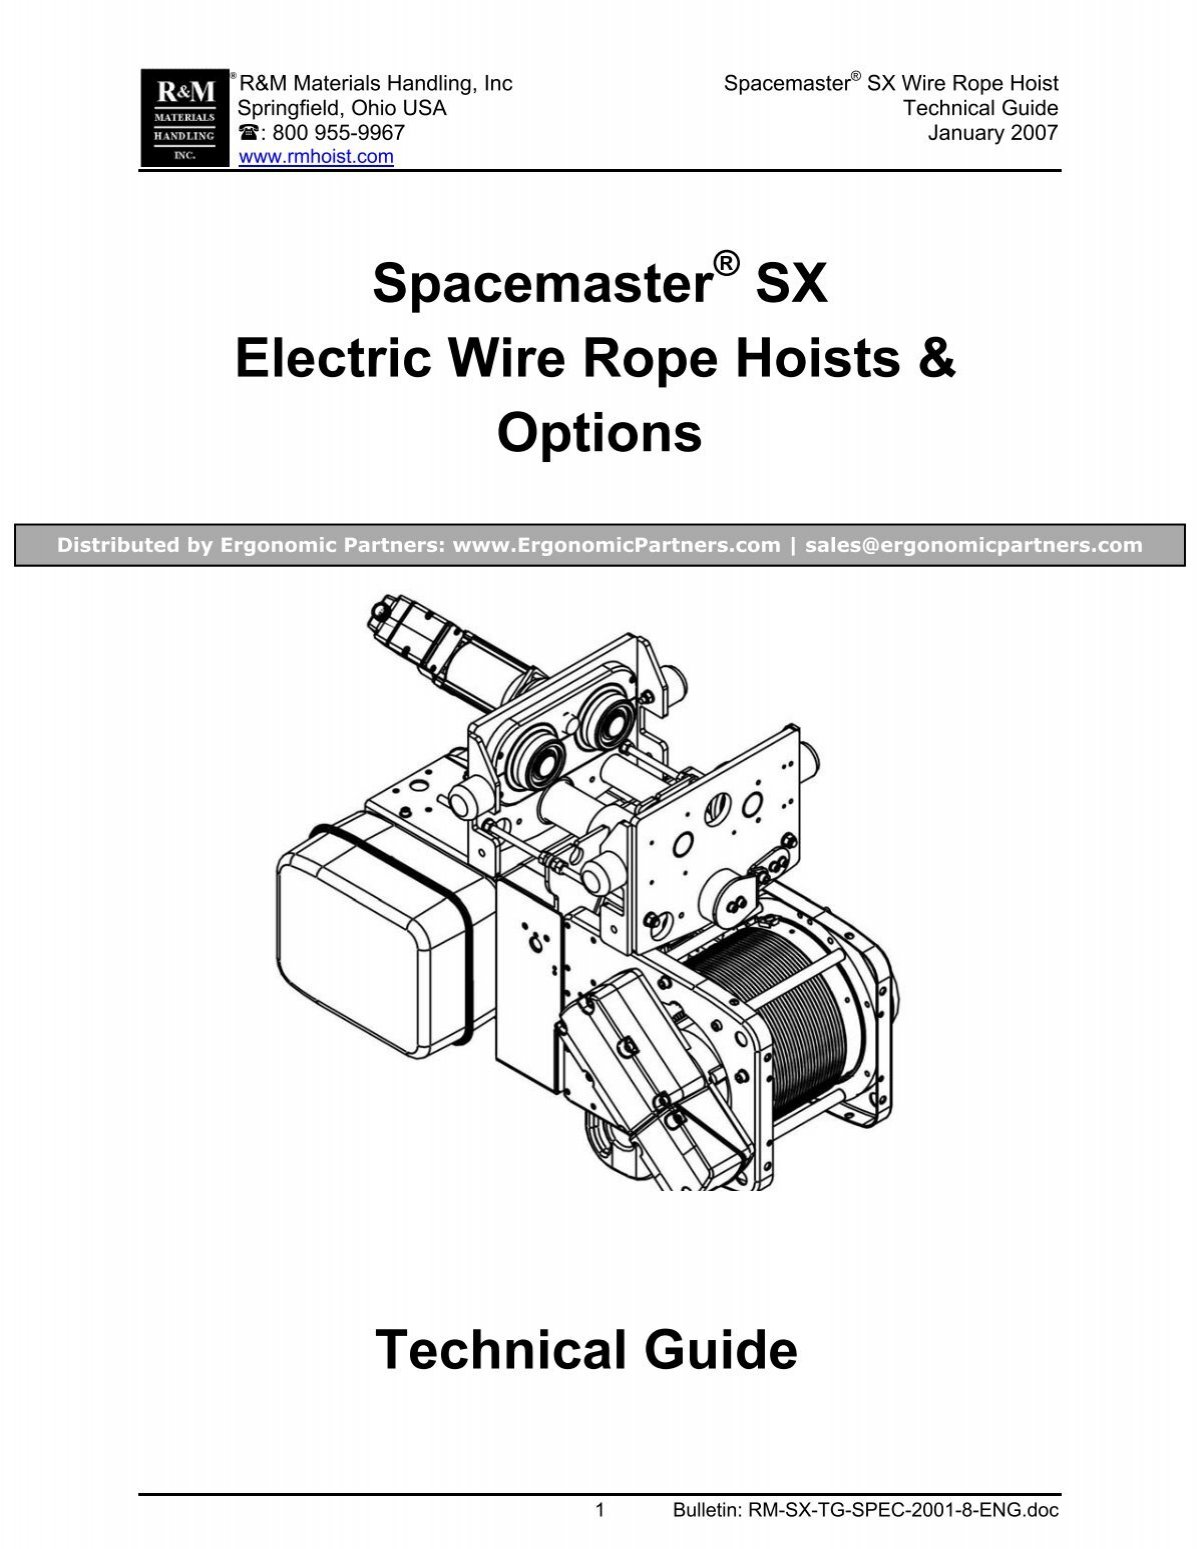 Spacemaster SX Electric Wire Rope Hoists & Options - Ergonomic